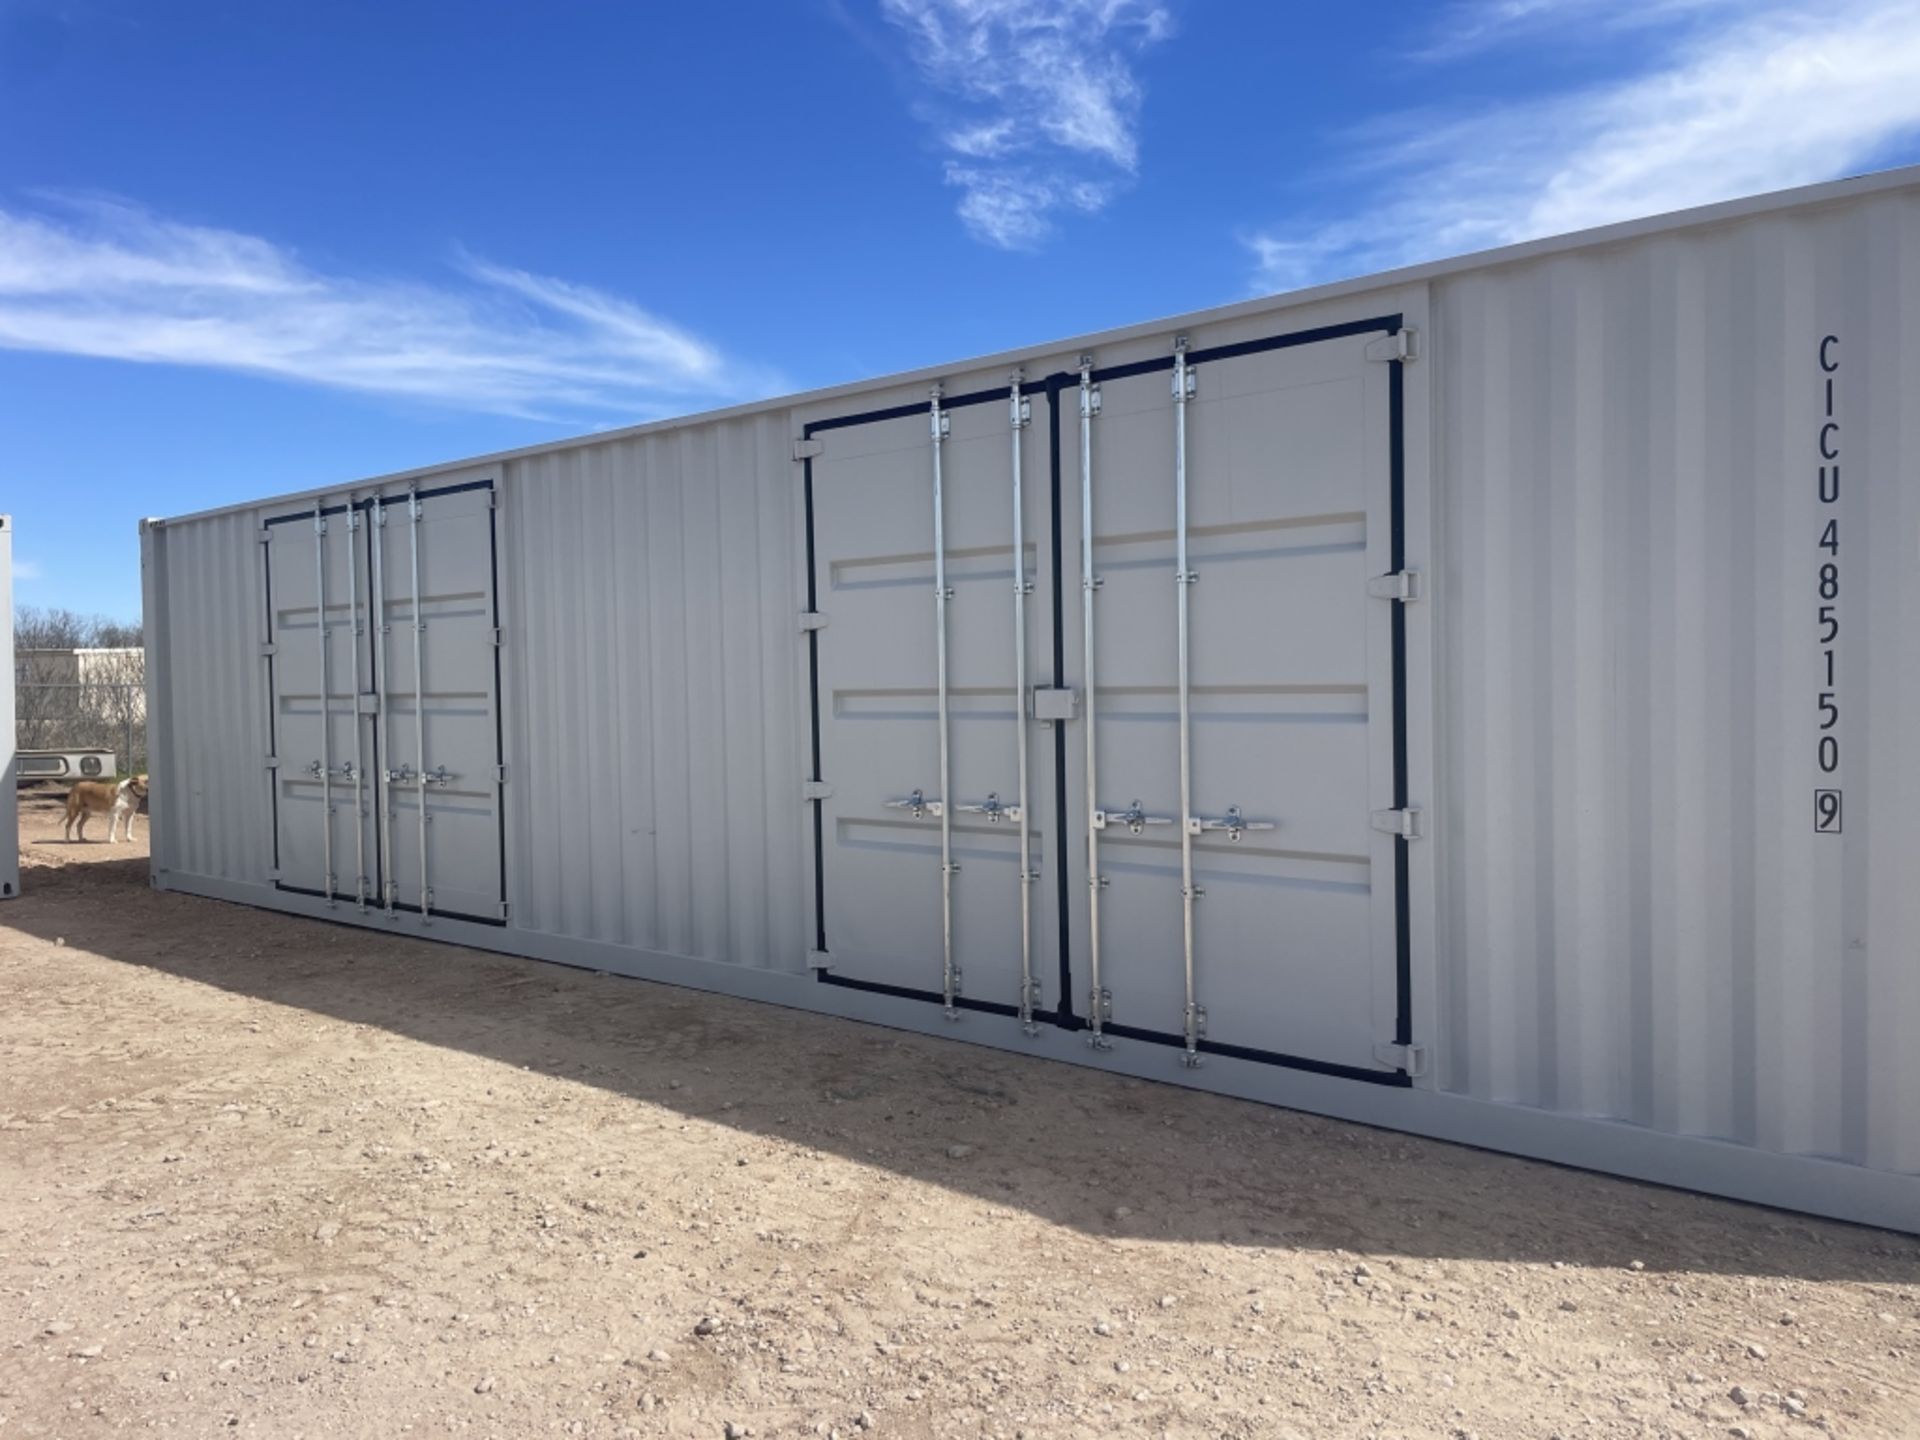 40’ one trip container w/2 side doors. CICU4851509 - Image 4 of 8